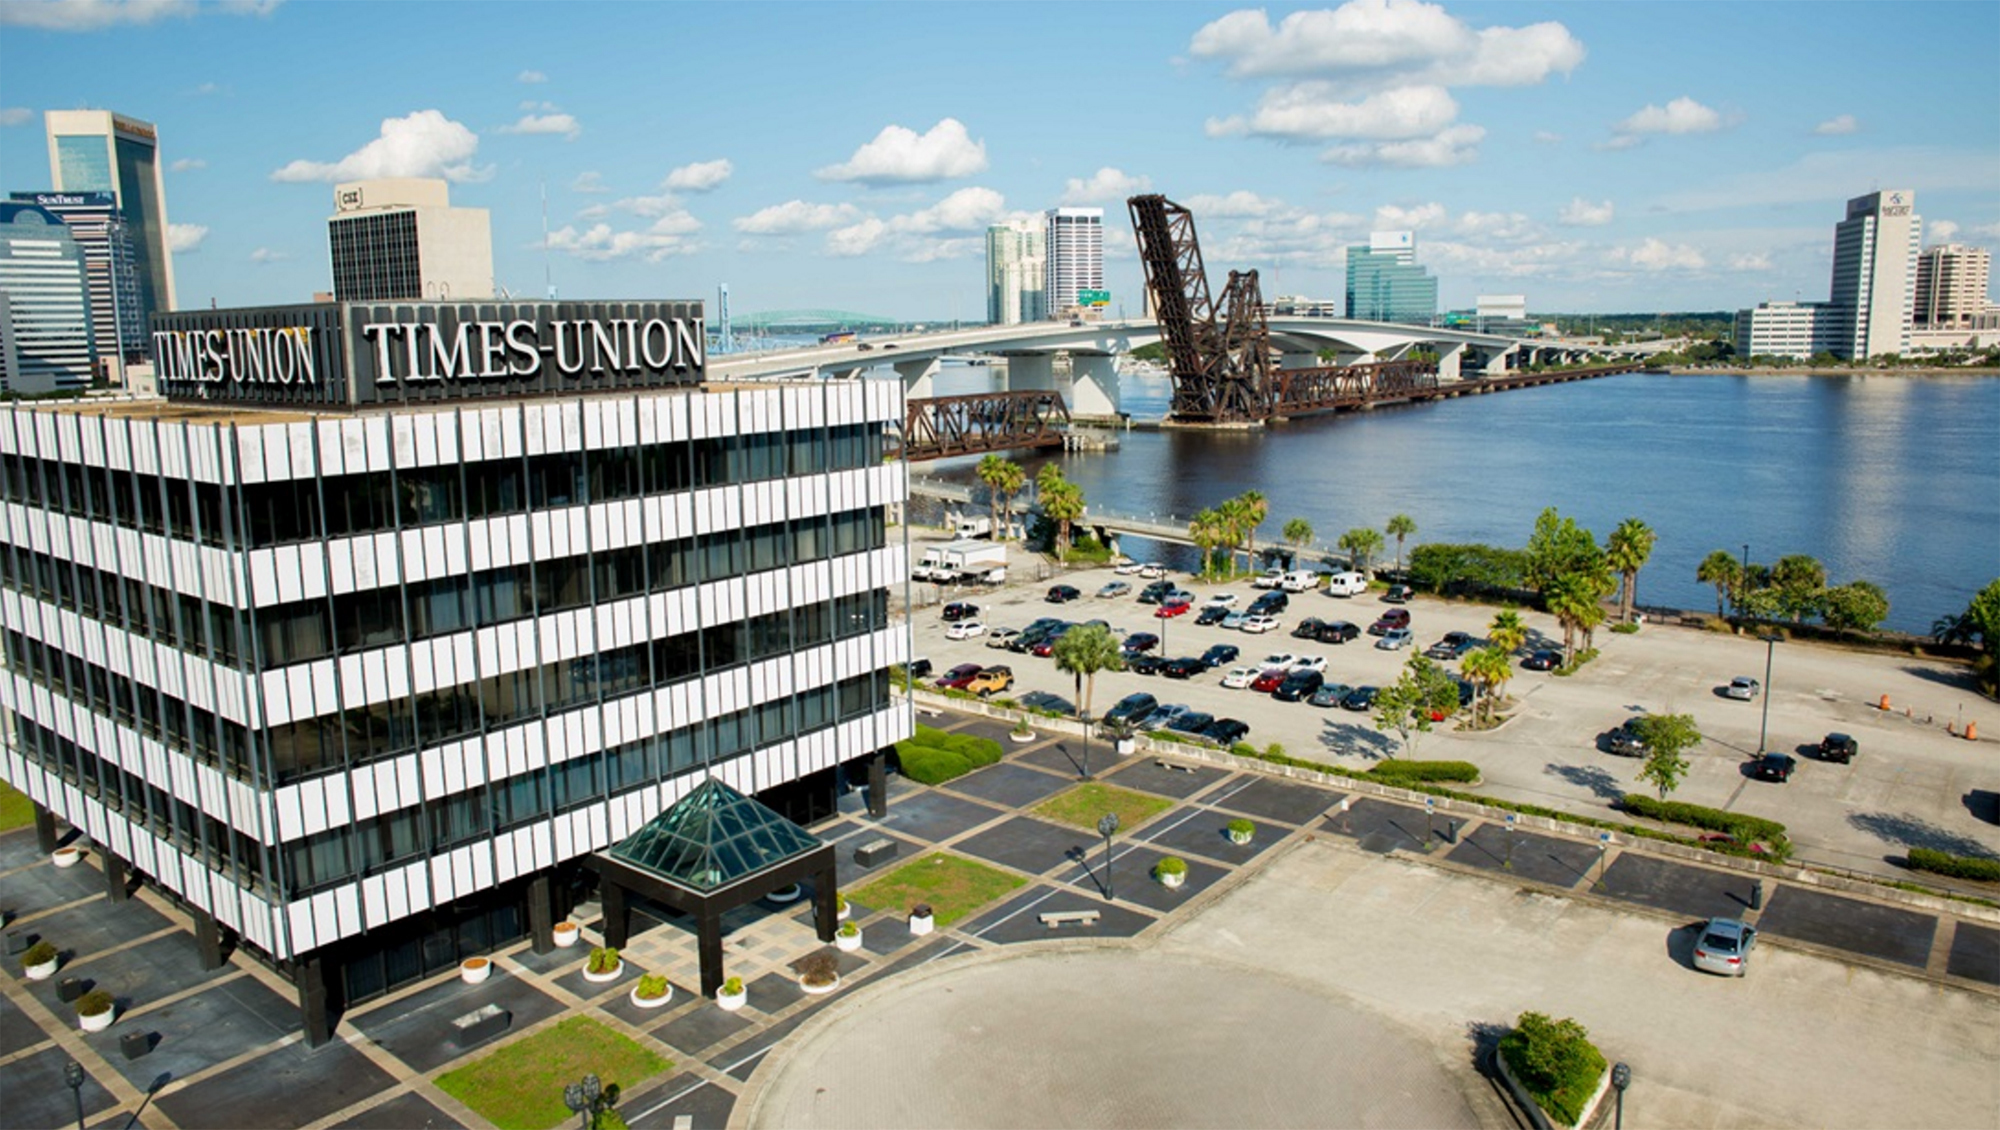 The Times-Union site features views of the St. Johns River and Southbank.